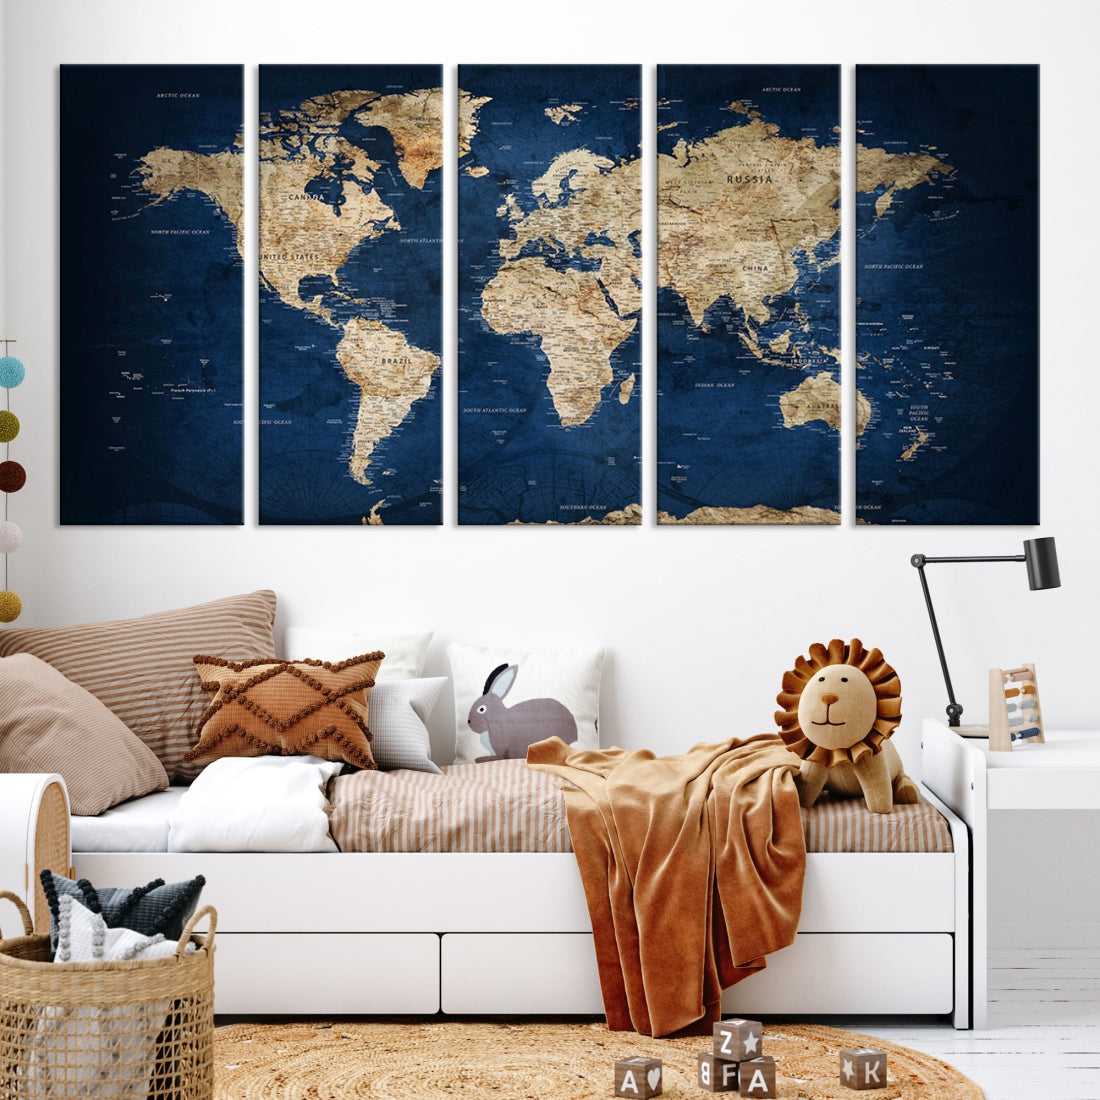 62011 - Vintage World Map Wall Art Print - Grunge Map on Canvas Gallery Wall Set of 3 Panels Gift for Traveler, Large Abstract World Map for Living Room Dining Room Kitchen Office Decor